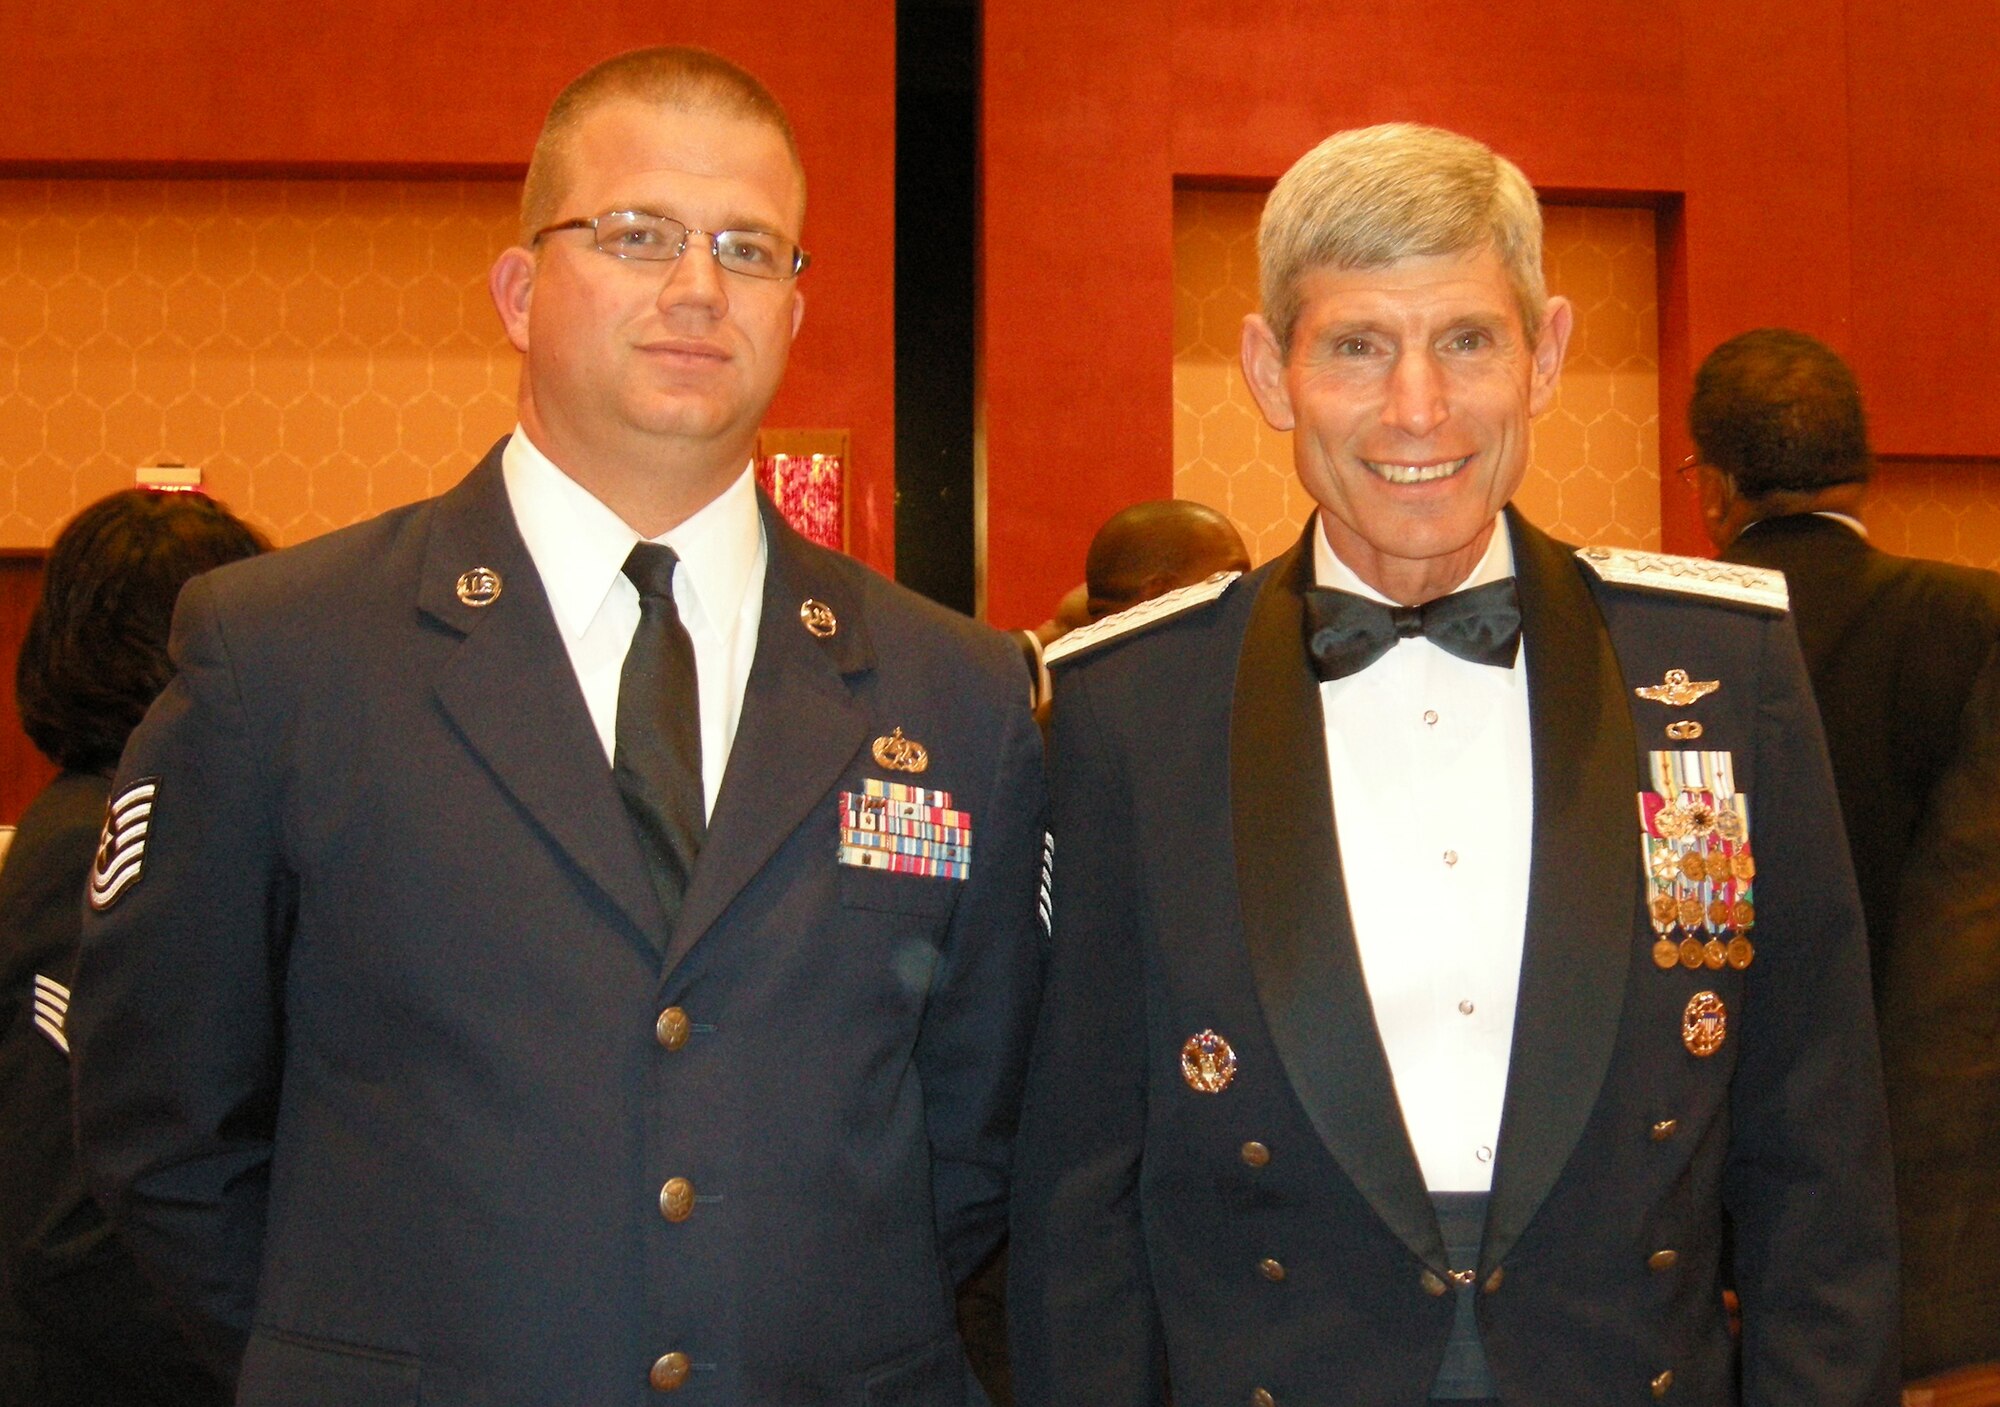 Tech. Sgt. William McDonald poses with Air Force Chief of Staff Gen. Norton Schwartz July 29 during festivities at the 39th Annual Tuskegee Airmen National Convention in San Antonio. Eight Airmen from the Air Force Reserve's 302nd Airlift Wing attended the event, hearing from senior military leaders on topics including mentoring, women in the military and financial management as well as training on leadership and development. The 302nd AW members also took part in sit-down conversations with surviving members of the famed Tuskegee Airmen "Red Tails" as they described their experiences from World War II and the military in general to the AF Reservists. The conference attendance was part of a series of career broadening events sponsored by the 302nd AW's Human Resources Development Council. (Courtesy photo)